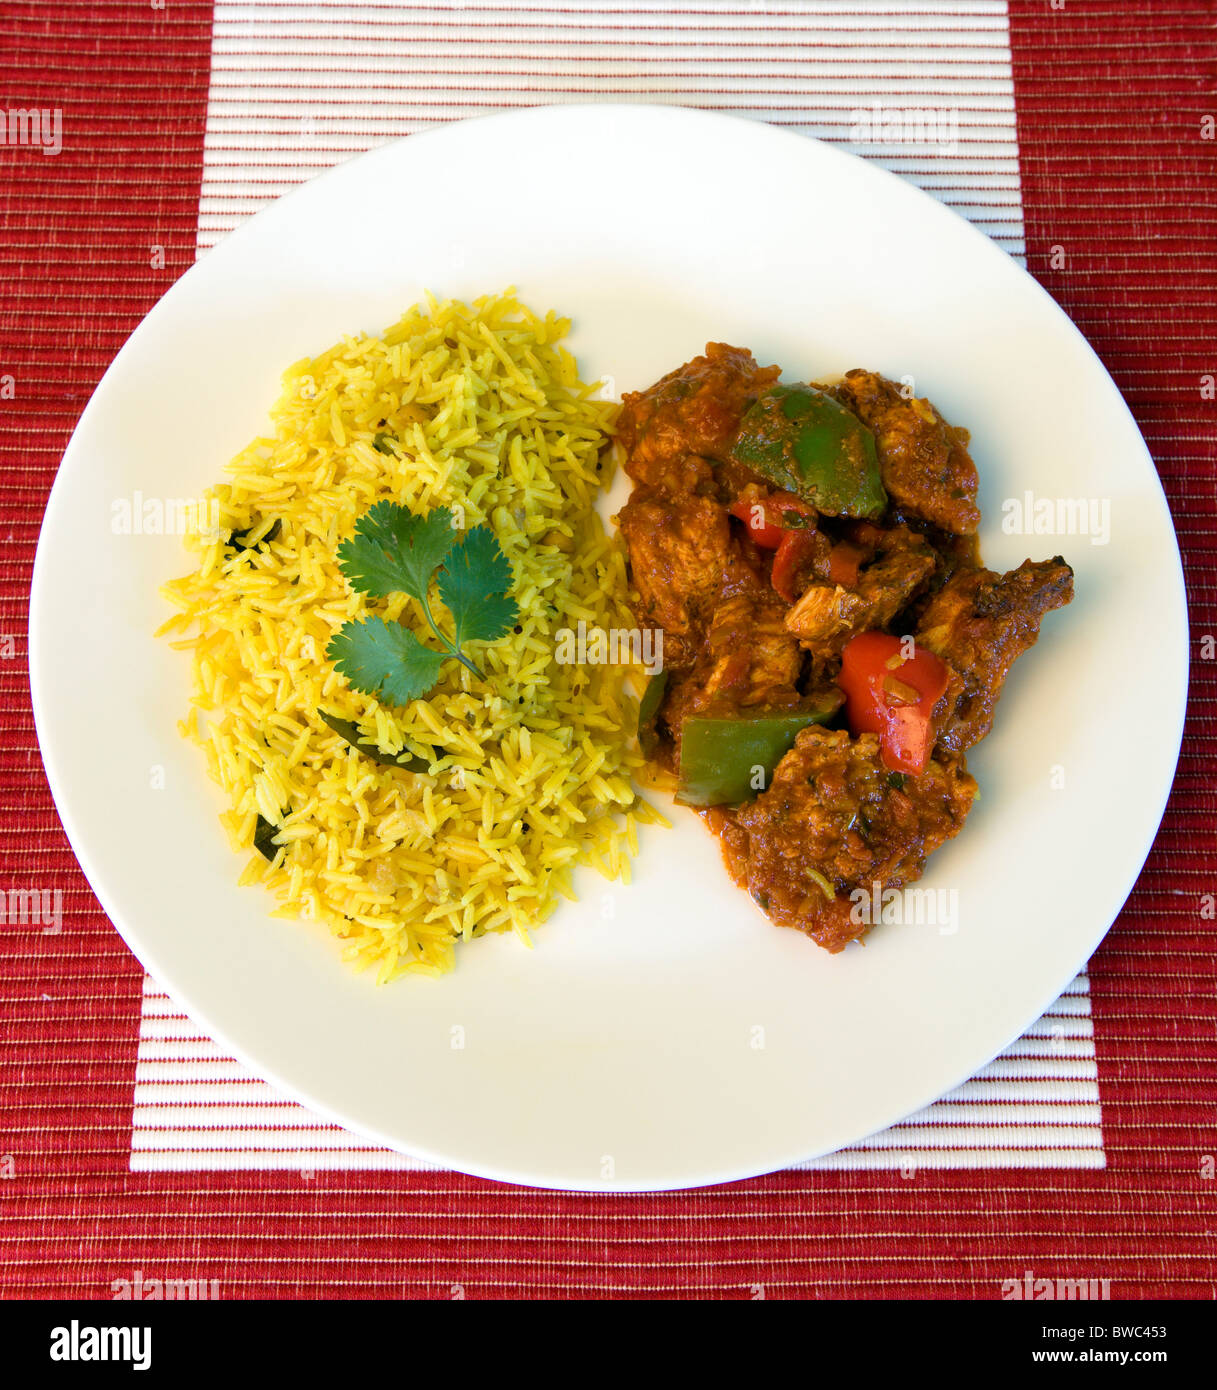 Food, Cooked, Curry, Indian chicken Jalfrezi curry with yellow pilau rice on a white plate. Stock Photo